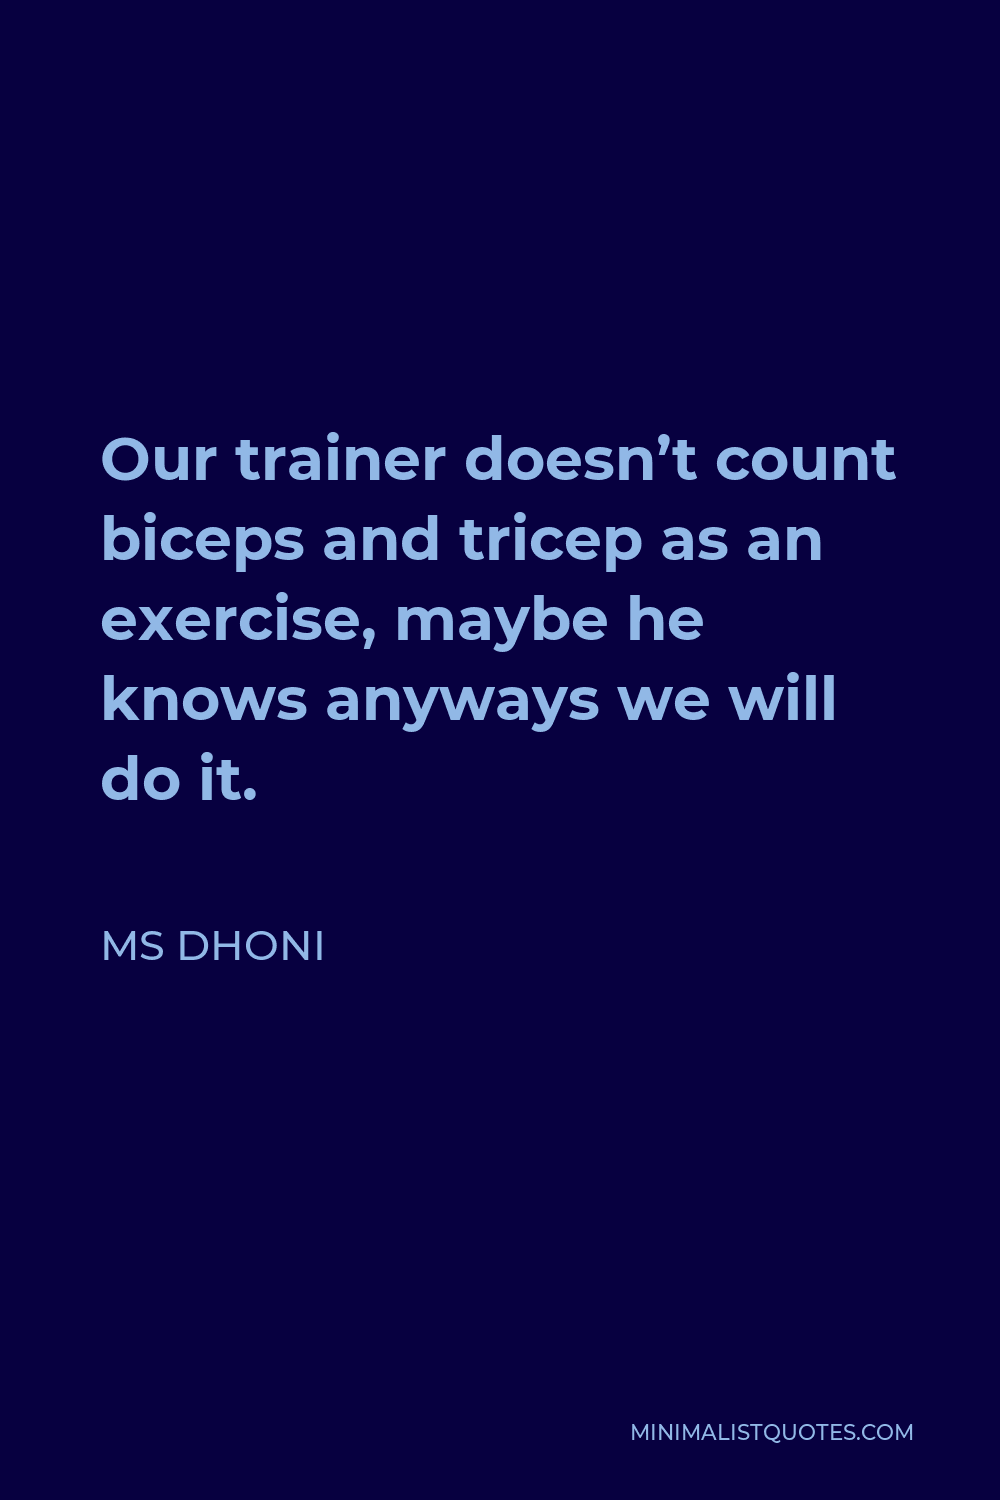 MS Dhoni Quote - Our trainer doesn’t count biceps and tricep as an exercise, maybe he knows anyways we will do it.